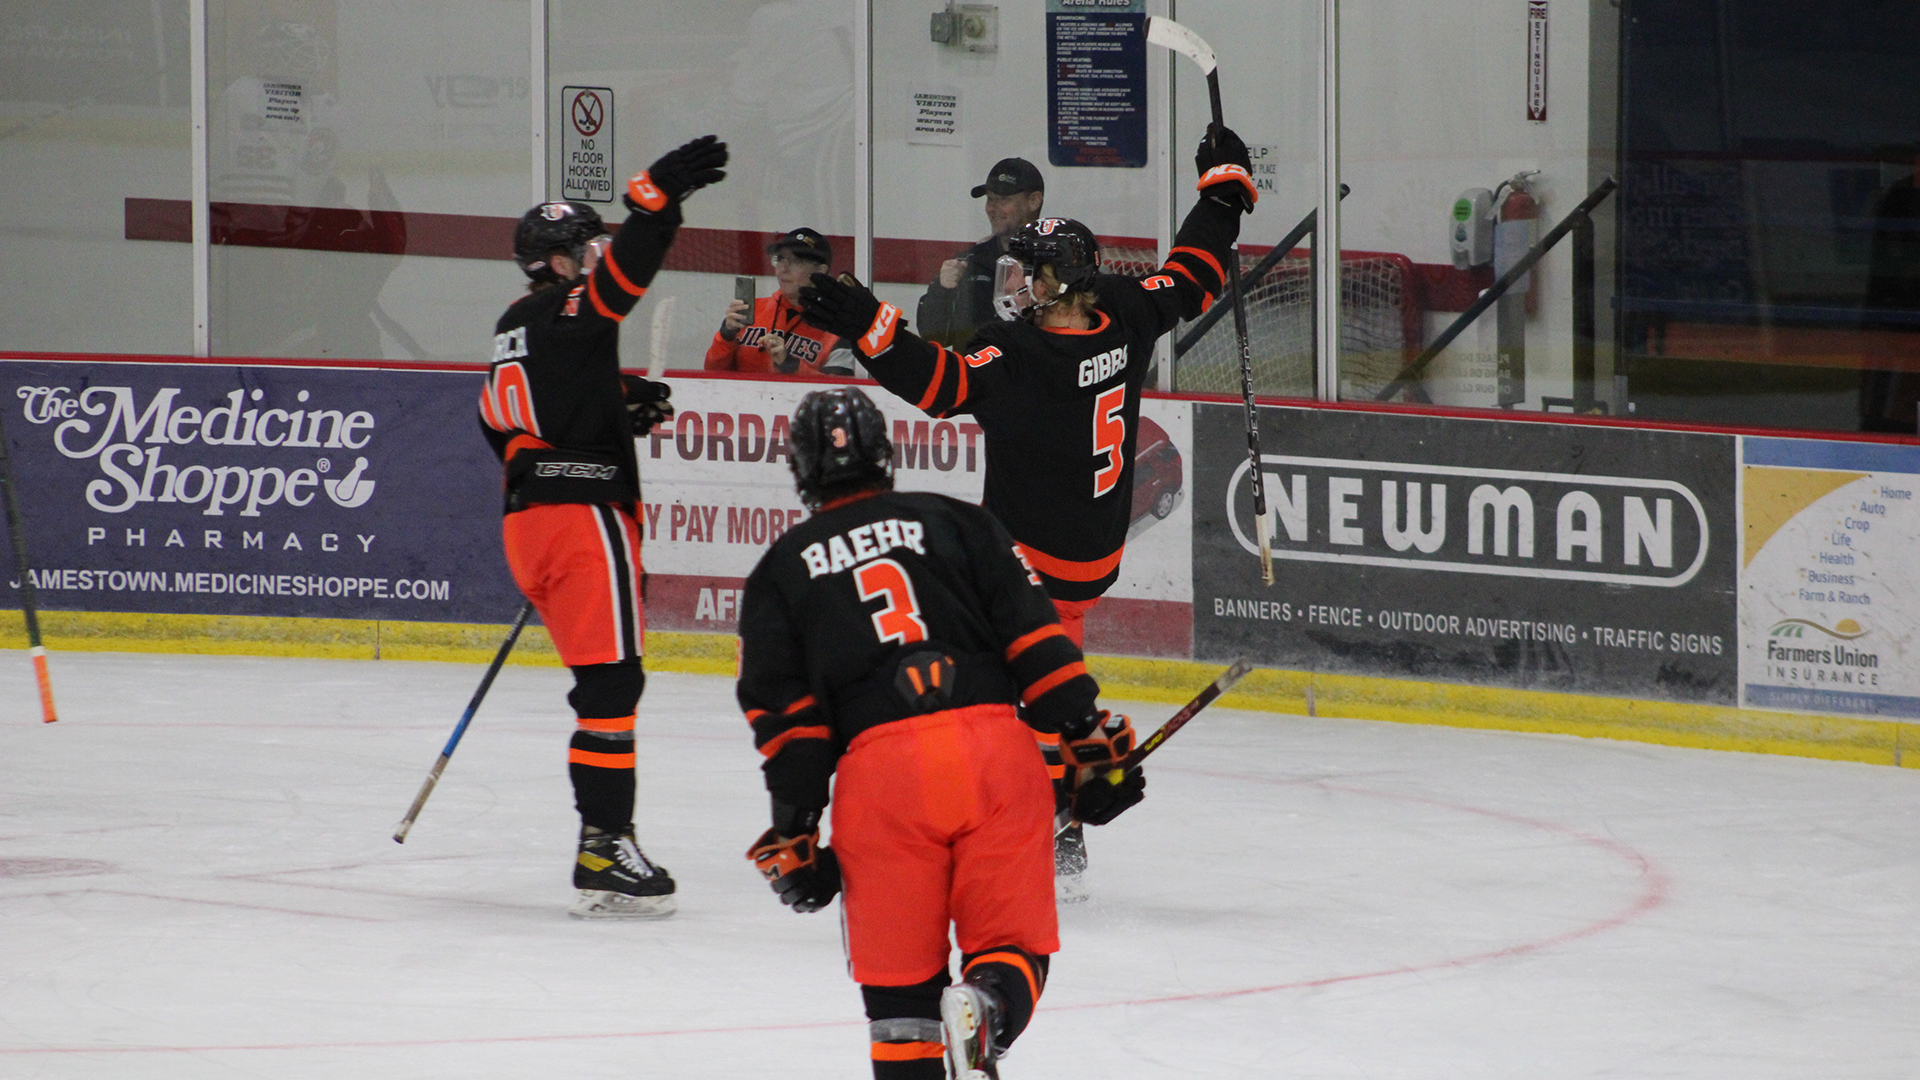 Jimmies score seven in season opening win over St. Cloud State